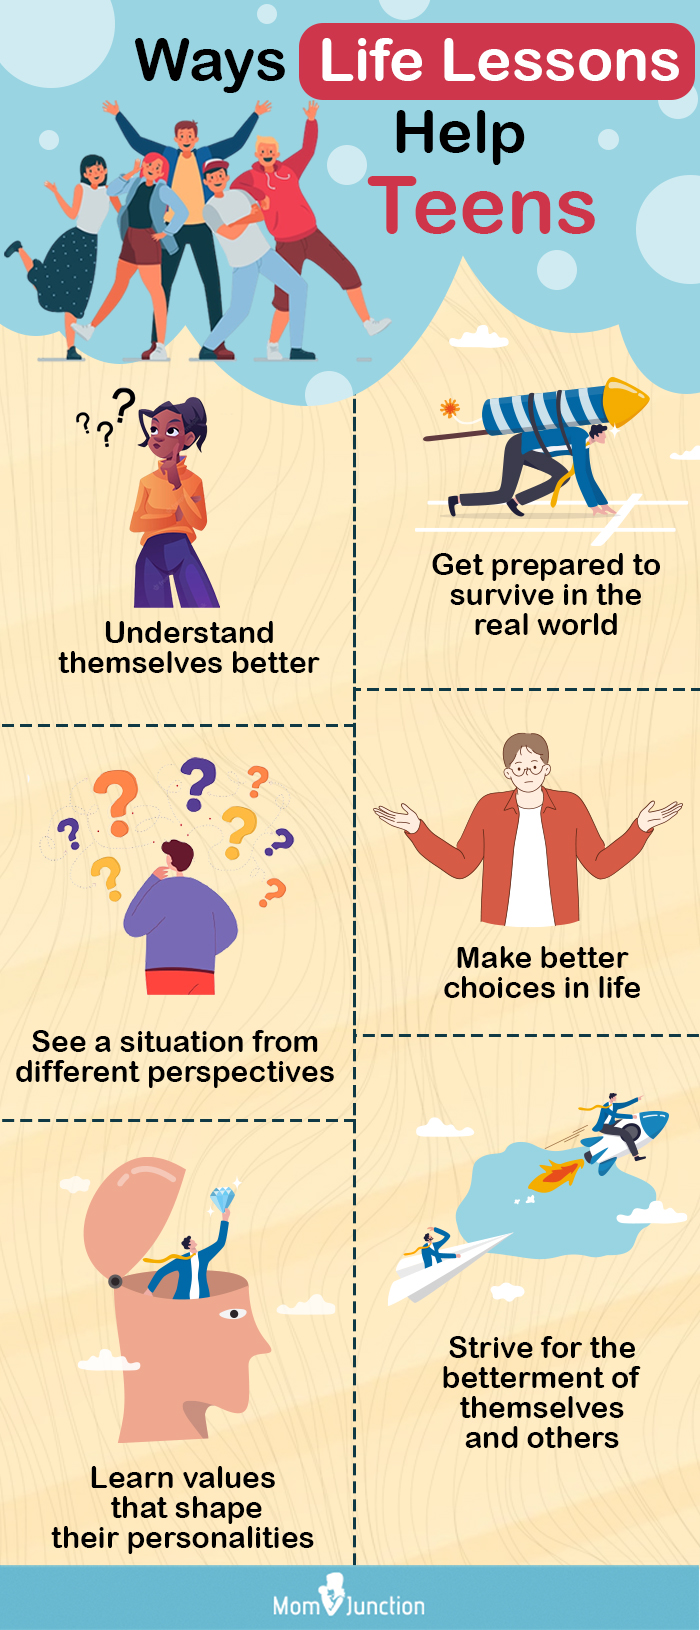 ways life lessons help teens (infographic)